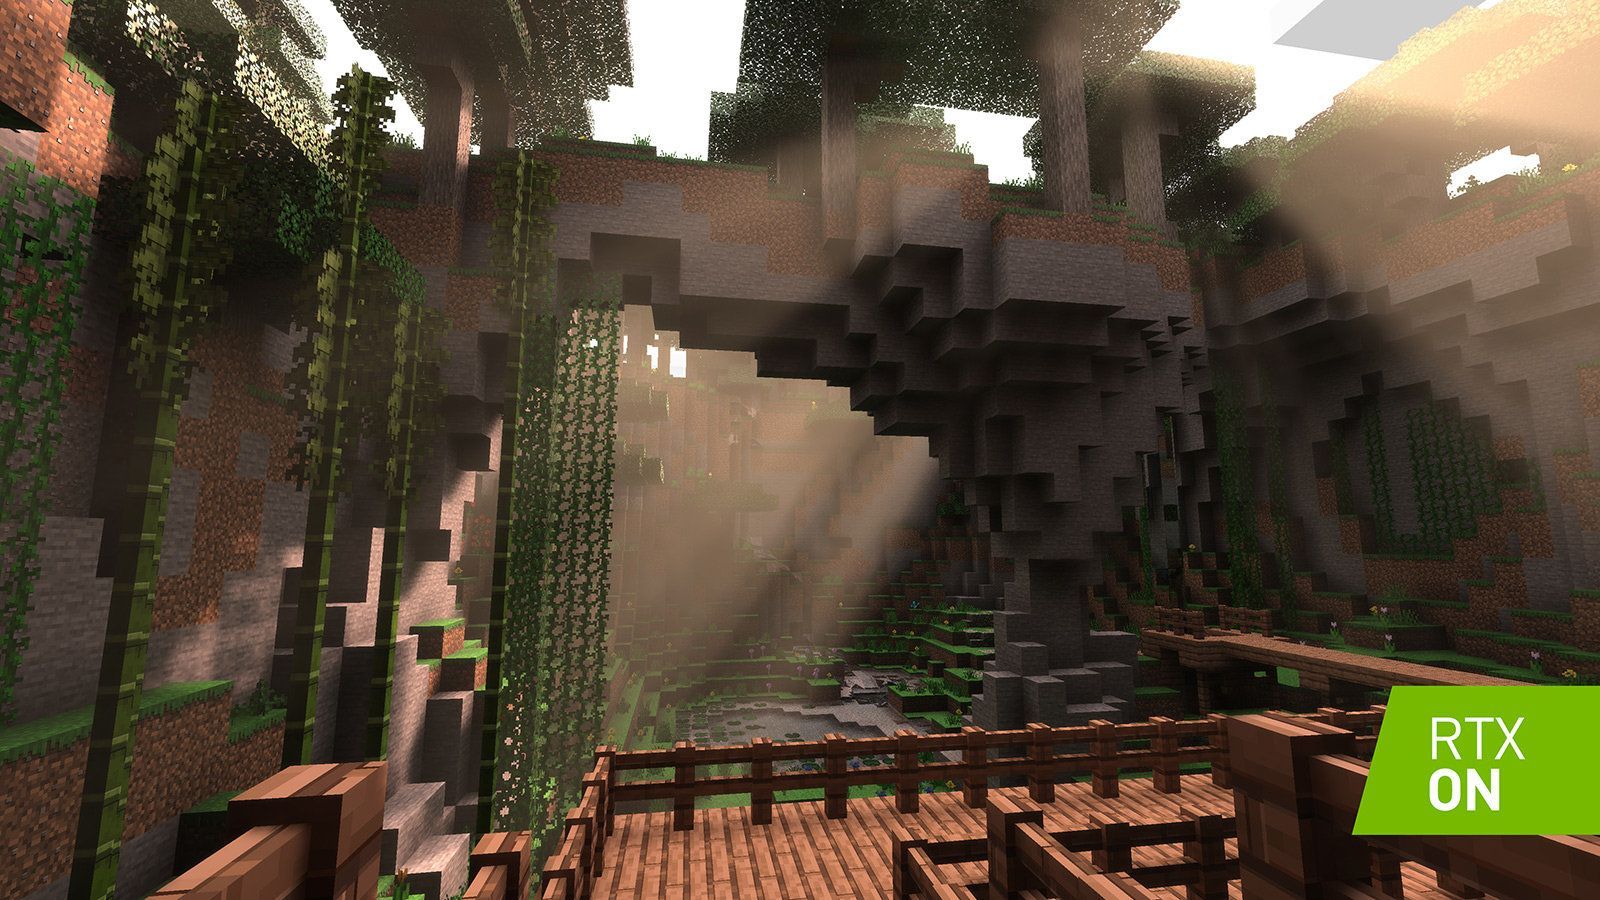 NVIDIA Ray Tracing On 'Minecraft' Looks Surprisingly Cool